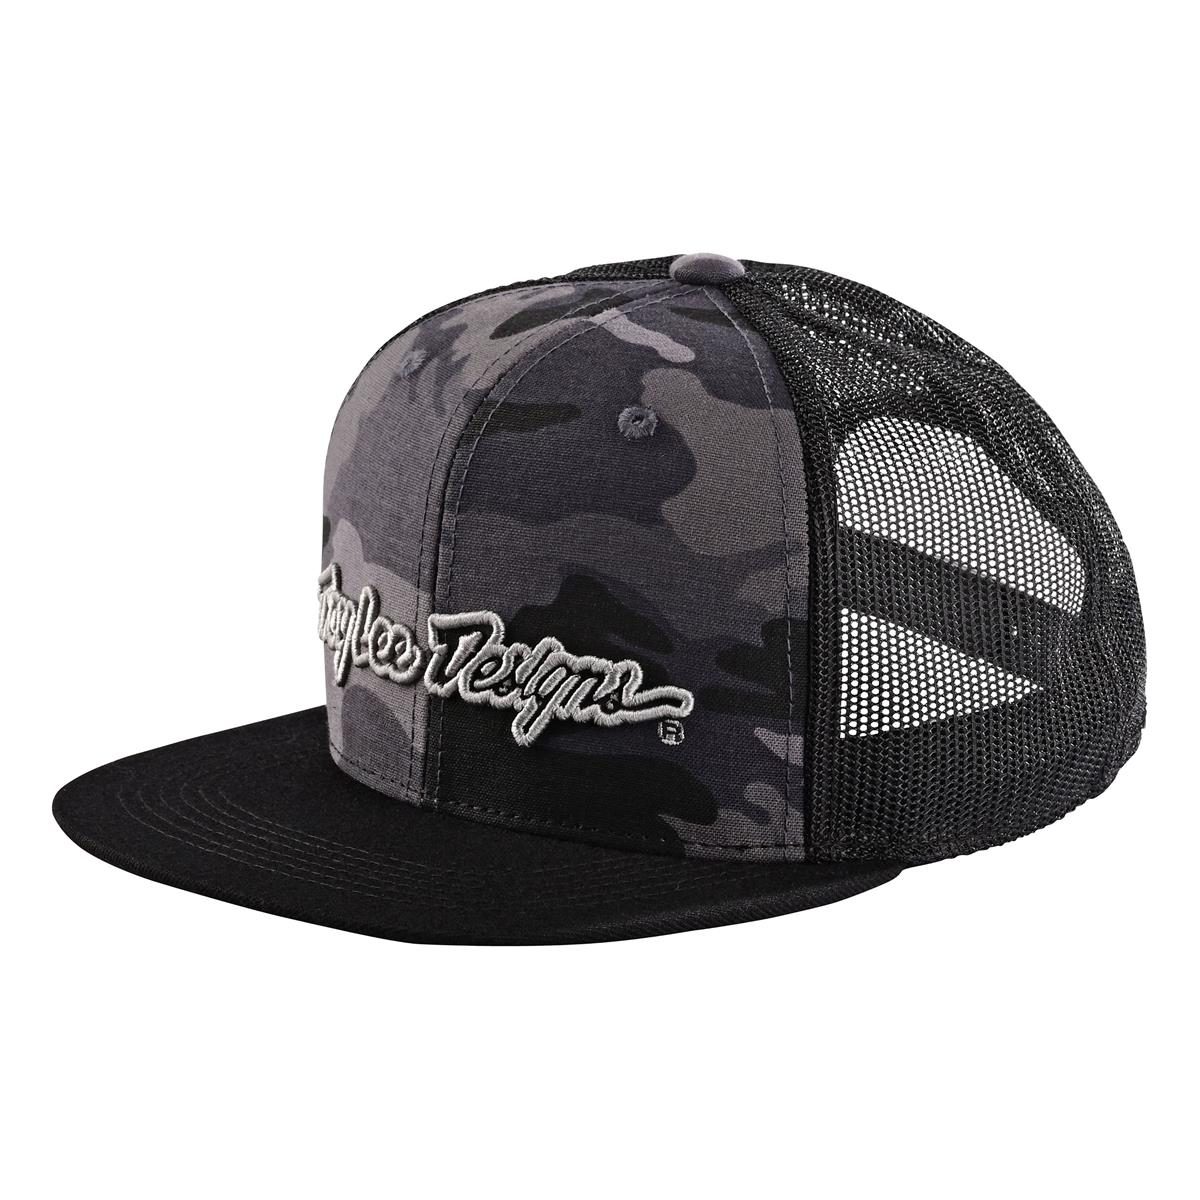 Troy Lee Designs 9Fifty Casquette Snap Back Signature Camo Black/Silver